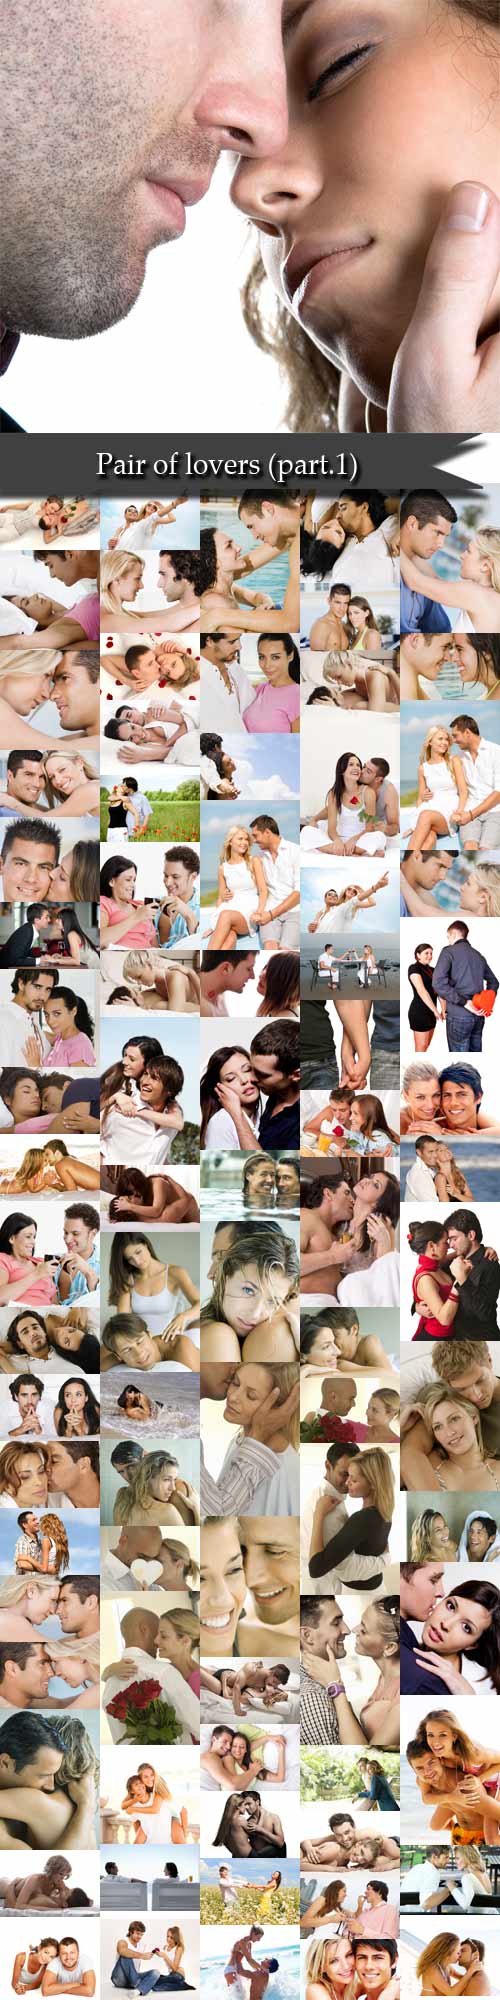 Stock photo of a pair of lovers - 1